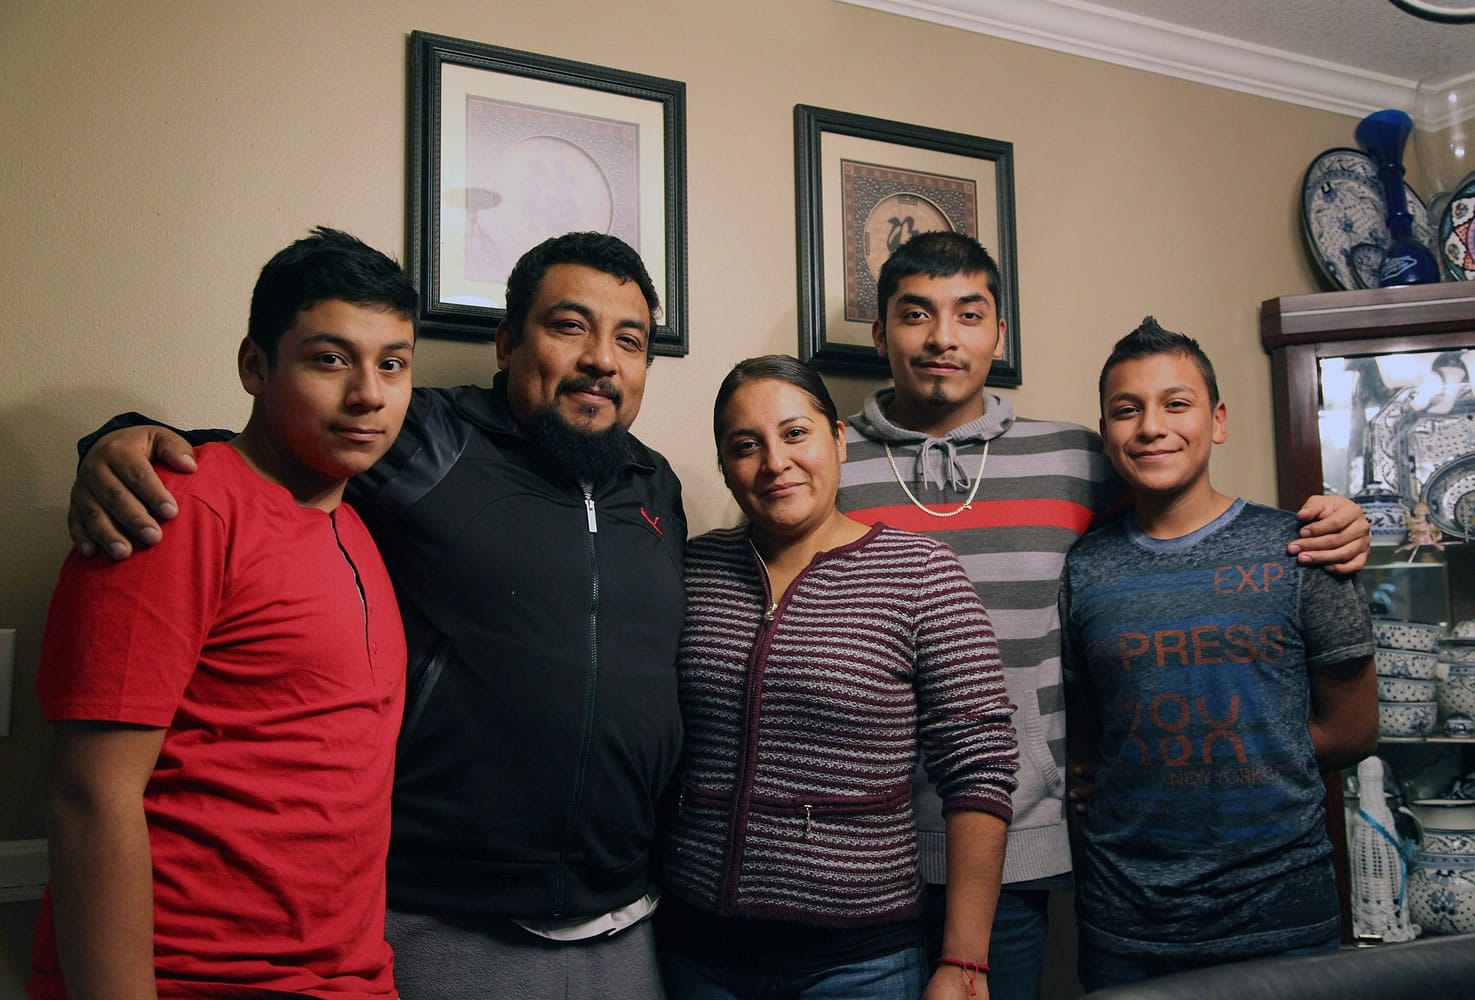 The Romero-Morales family, from left, Kevin, Jorge, Clara, Alan, and Naethan, lives in Aloha, Ore. The parents, Clara and Jorge, will likely qualify for relief from deportation, because two of their sons are U.S.